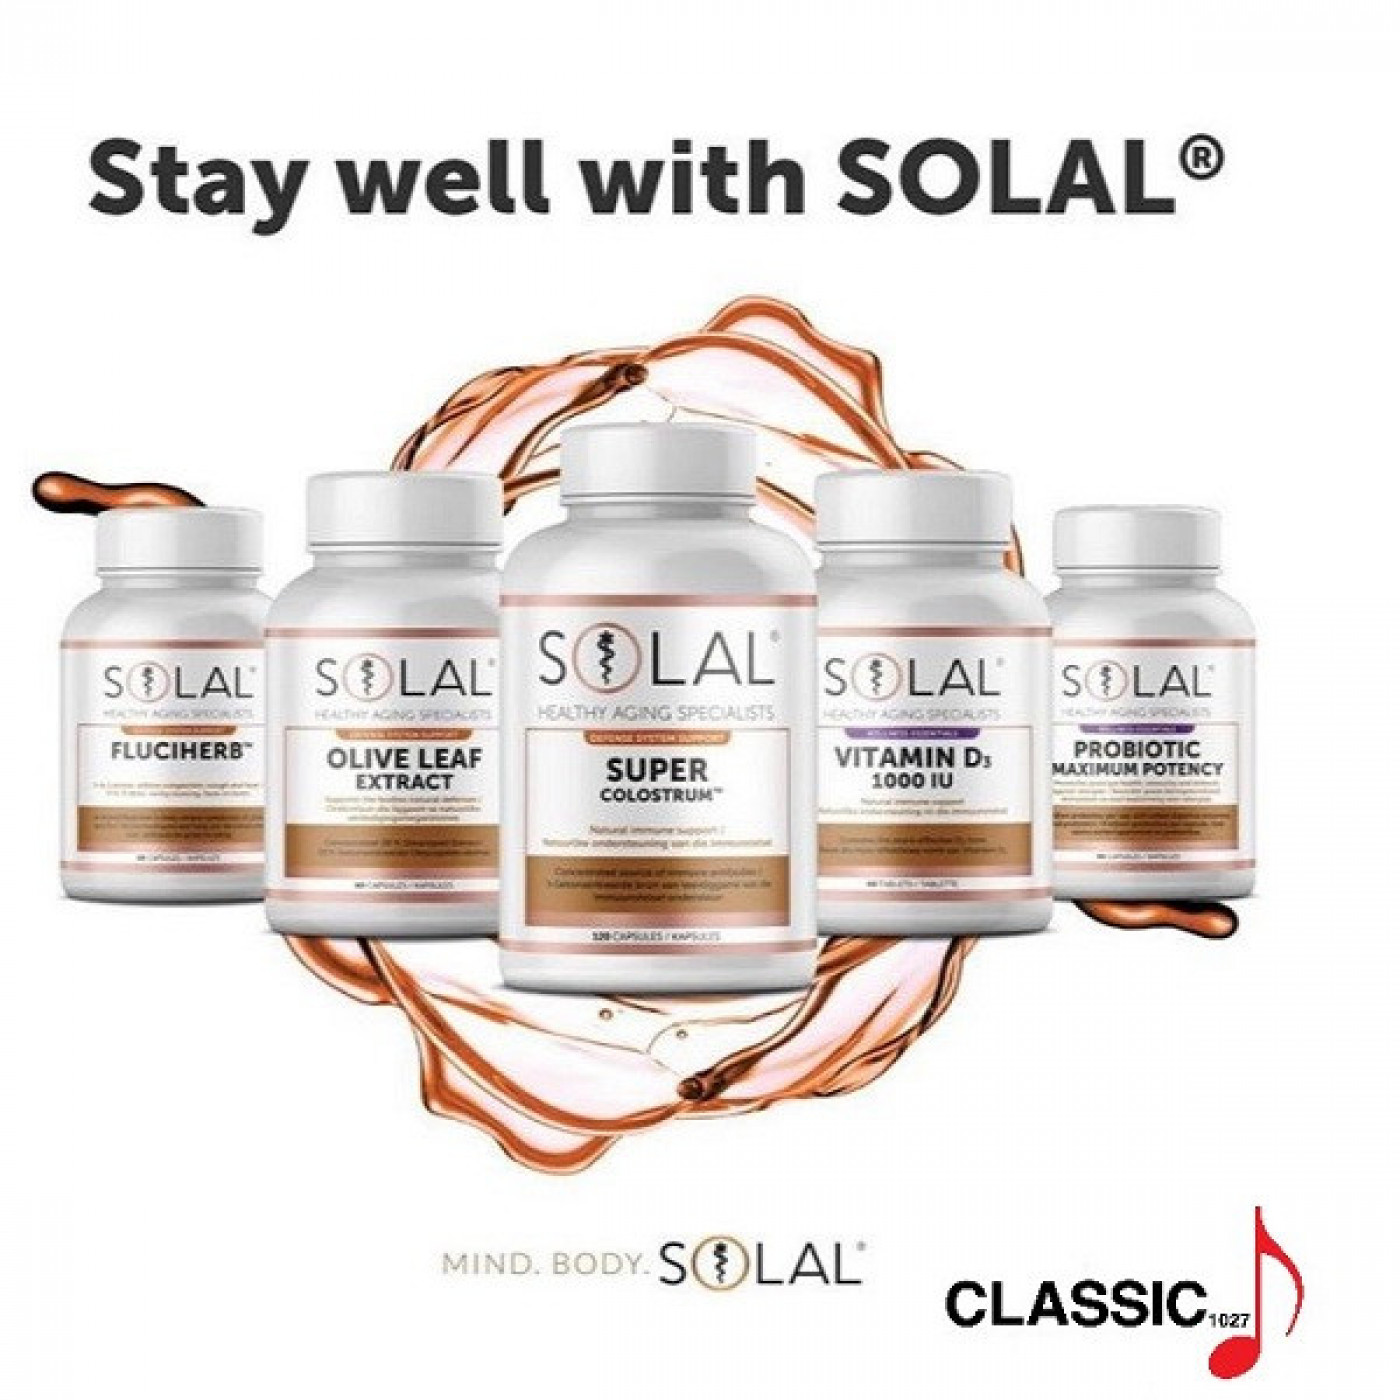 Stay Well with Solal - What precautions to take as you start to leave the house more often